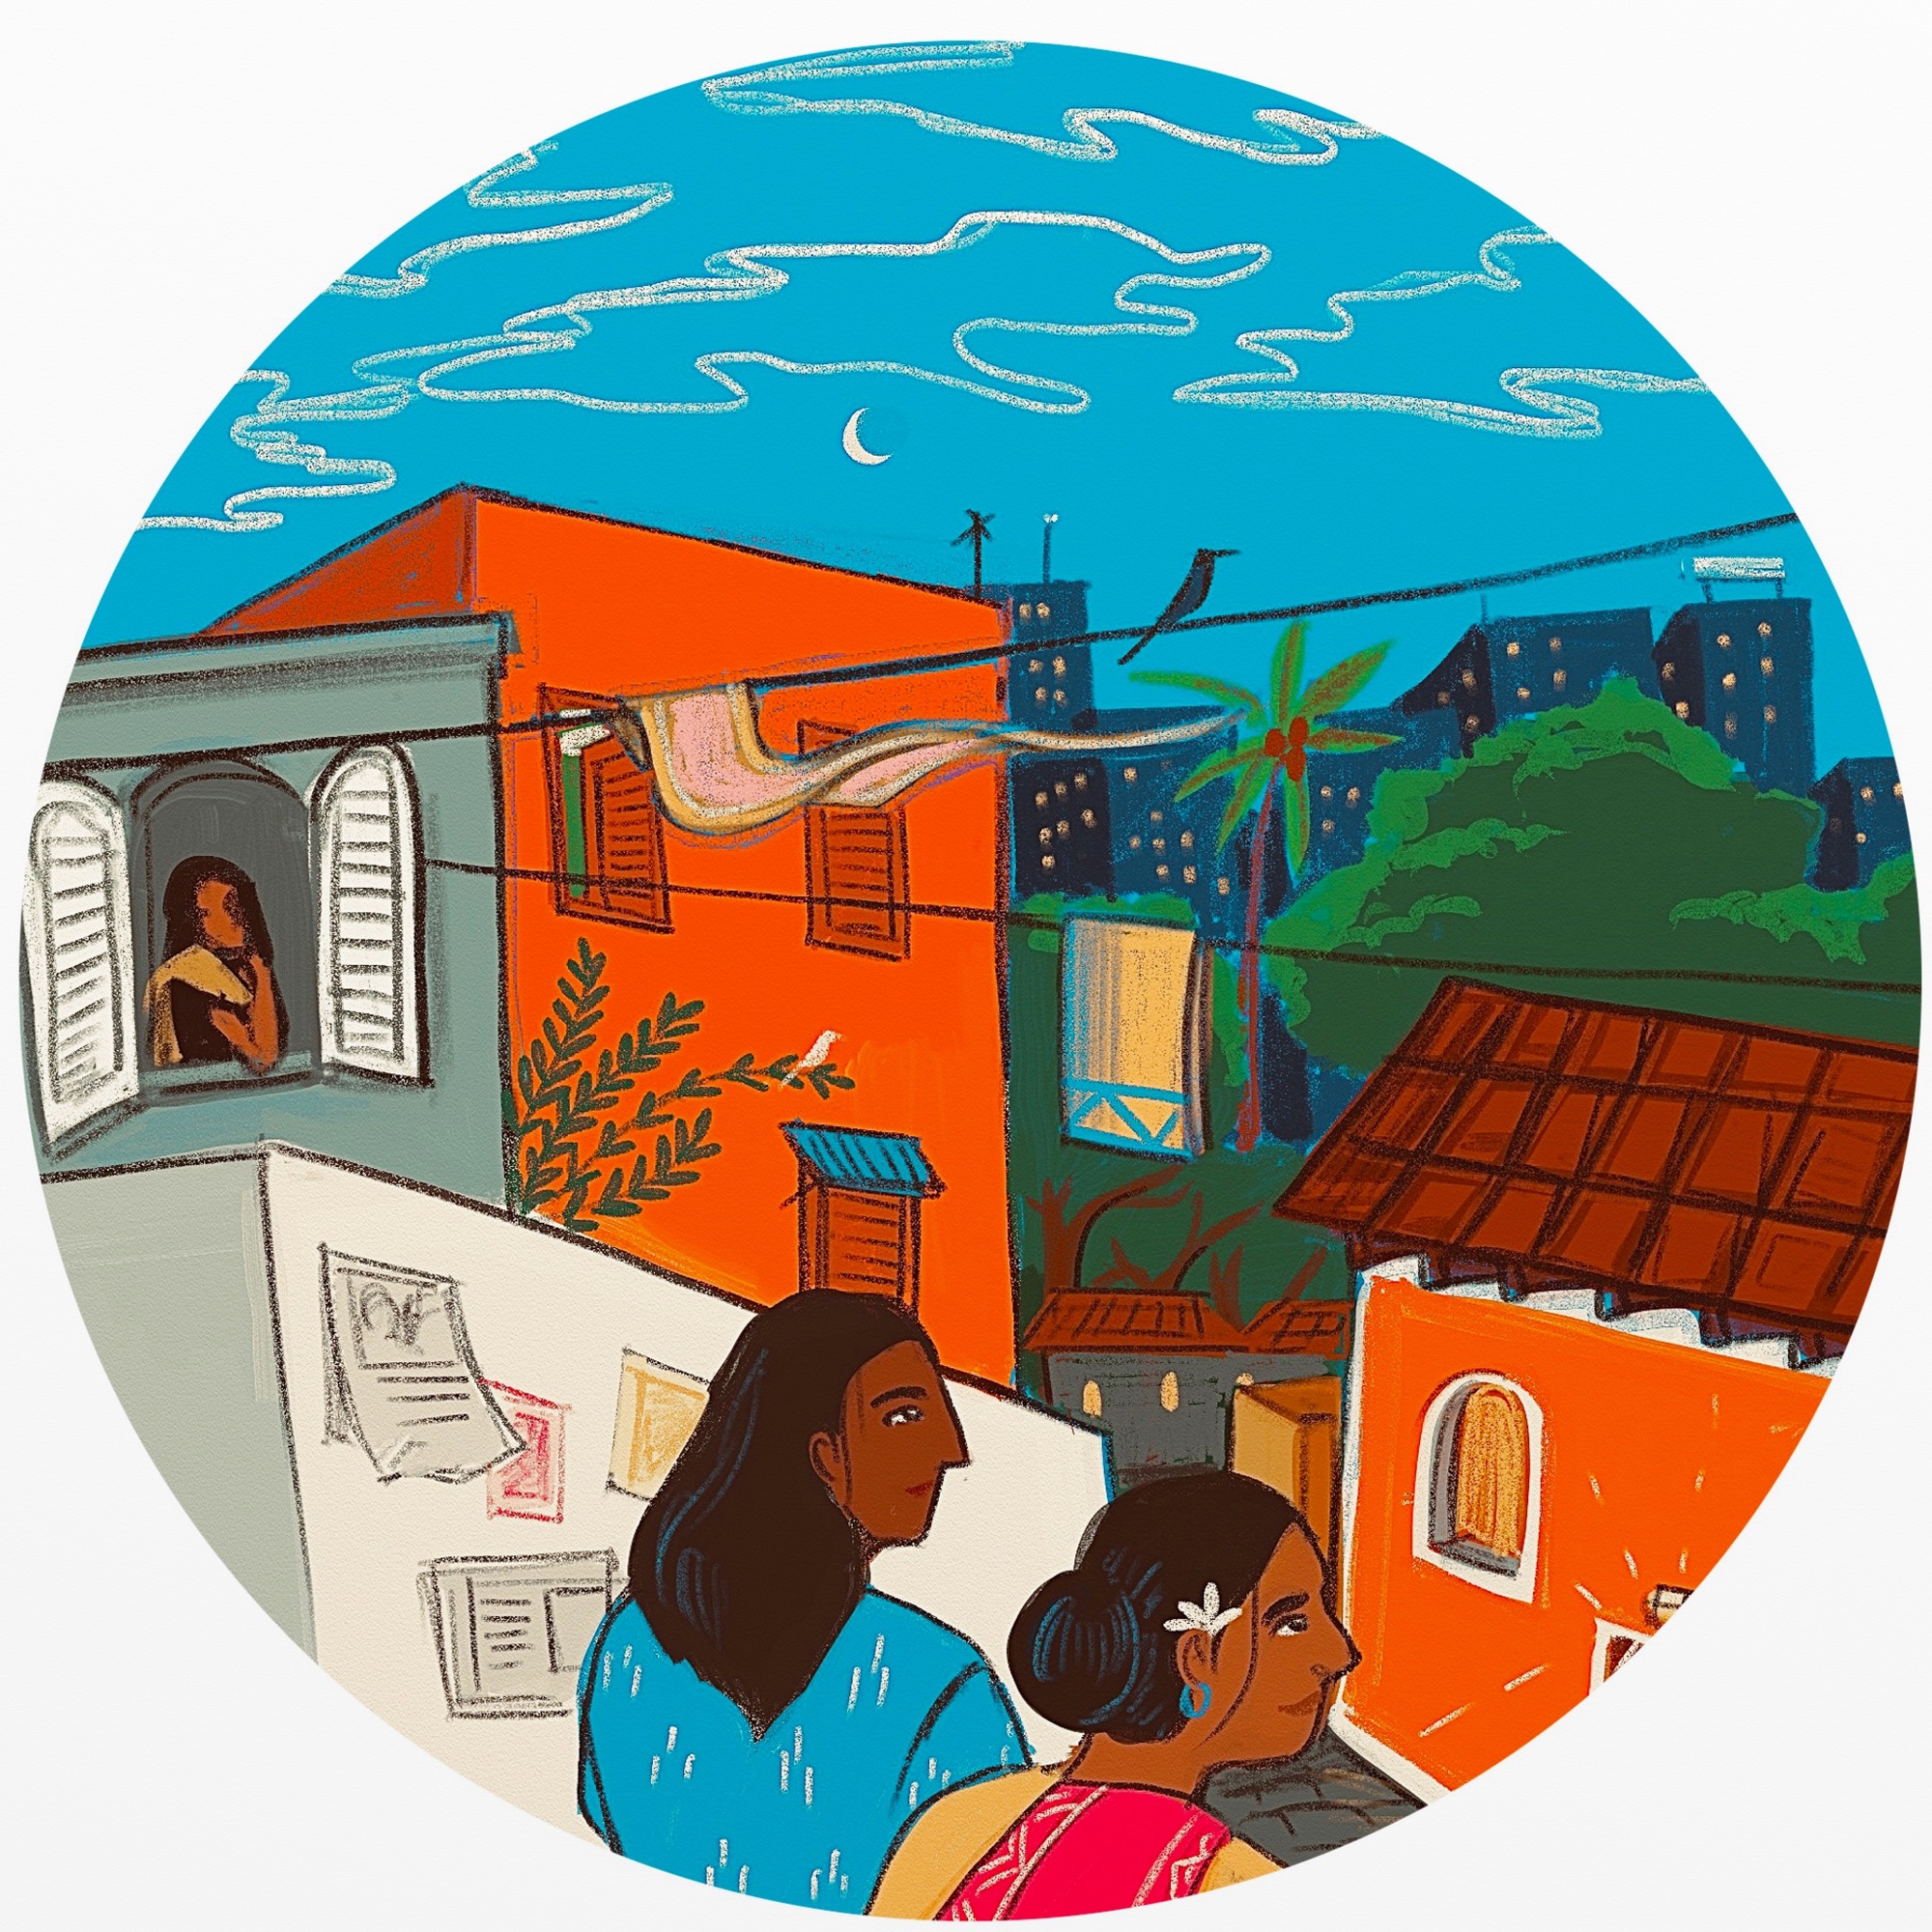 An illustration of Indian women looking out over a town